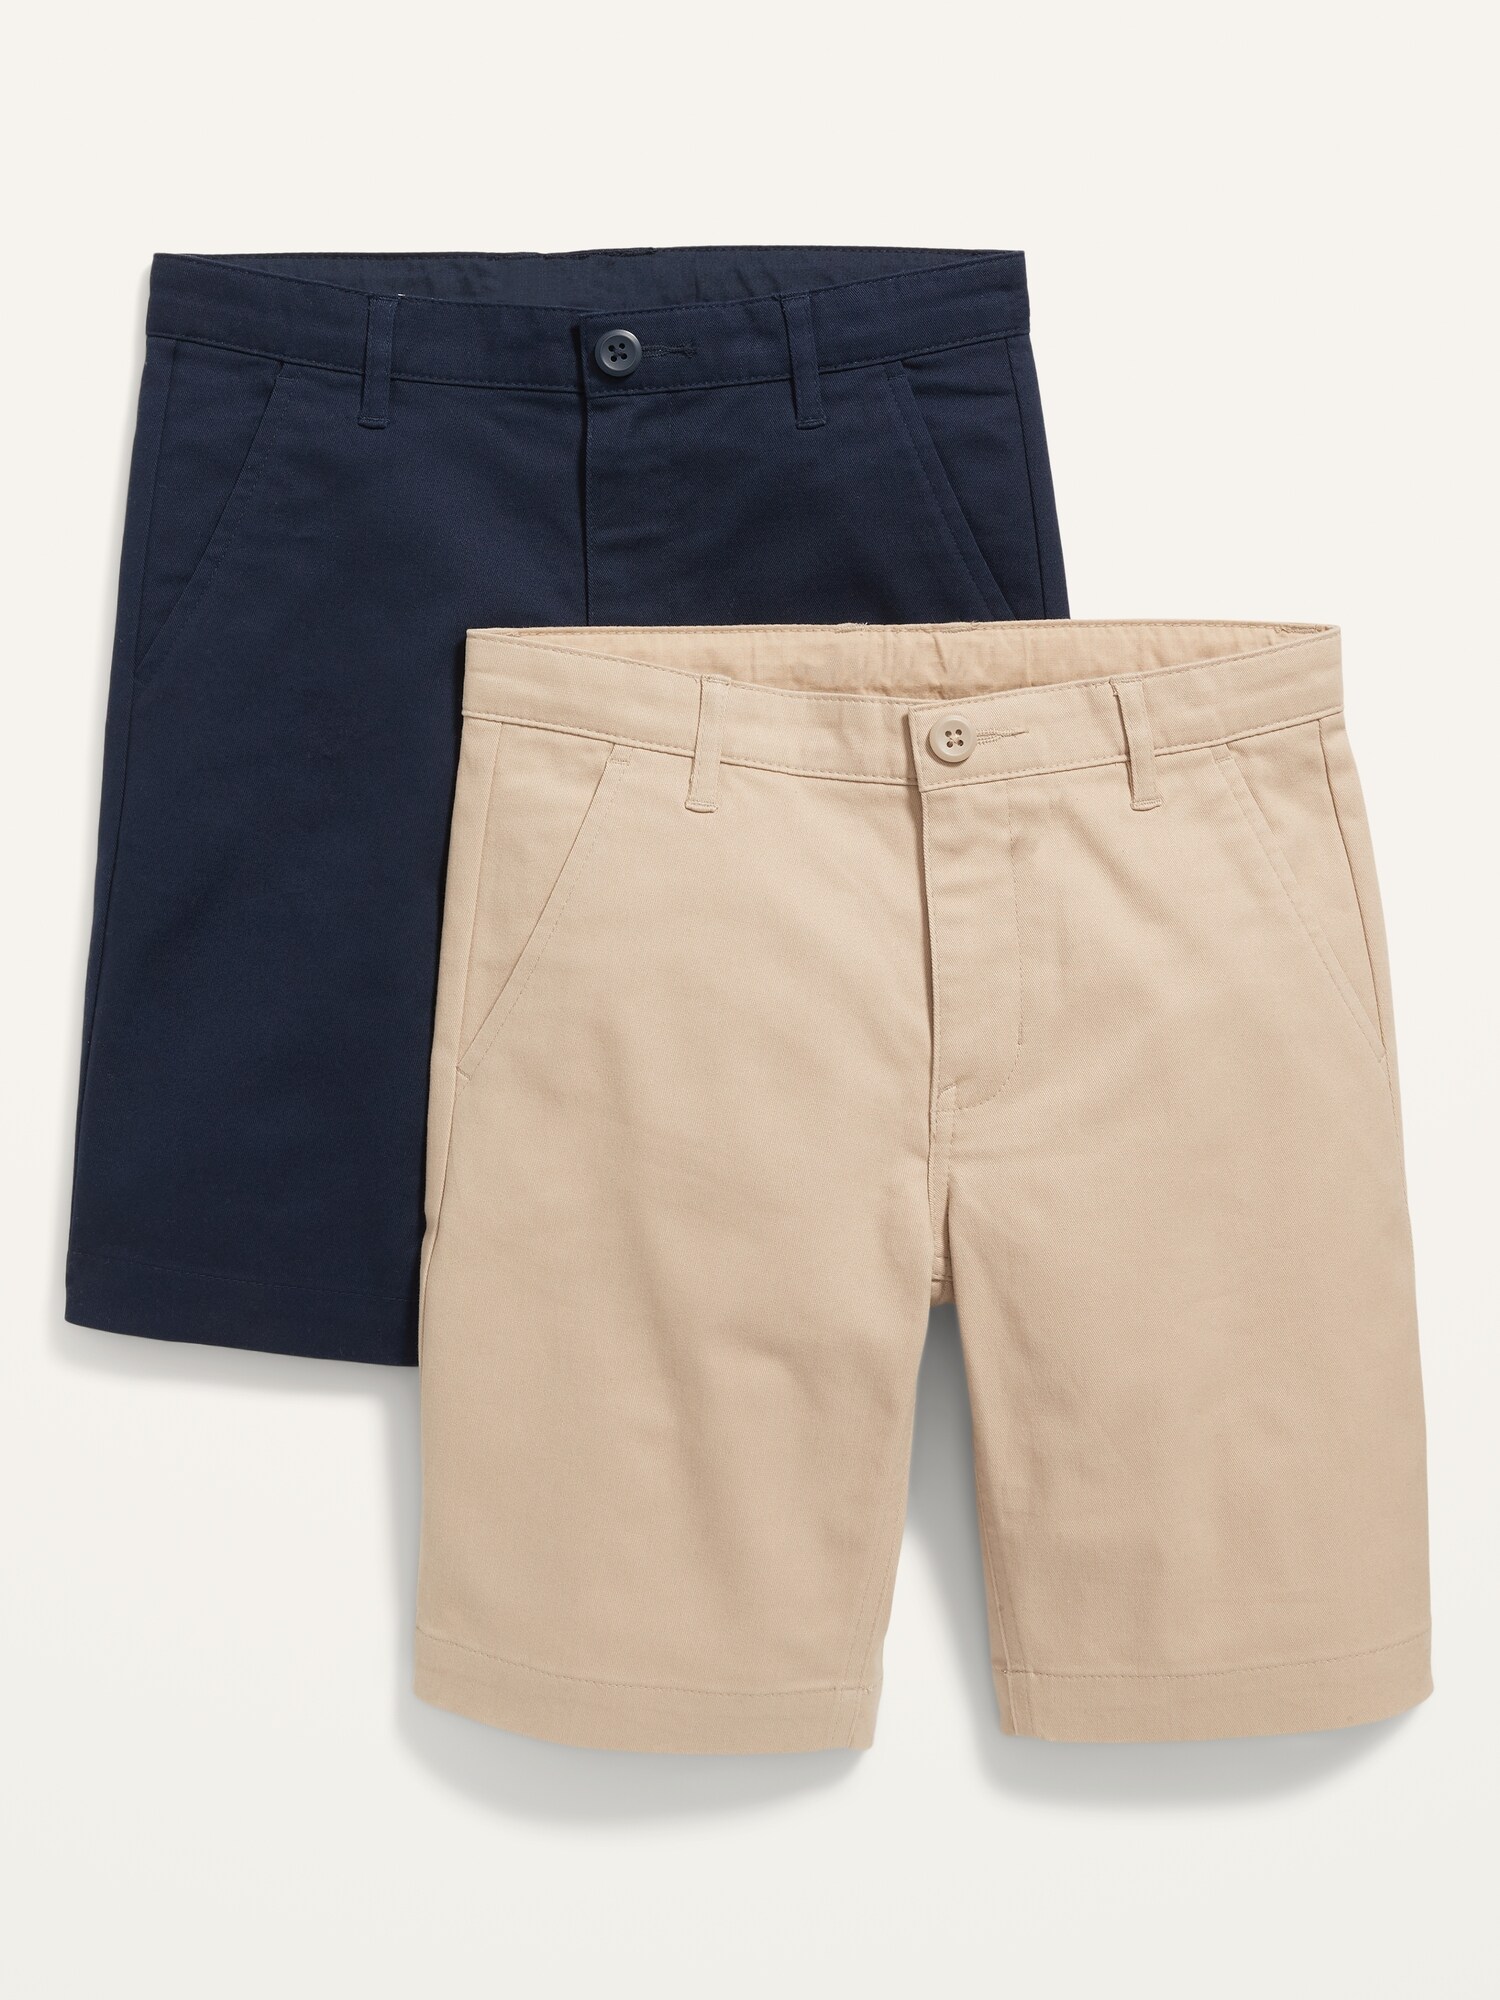 Built-In Flex Straight Uniform Shorts 2-Pack for Boys (At Knee)